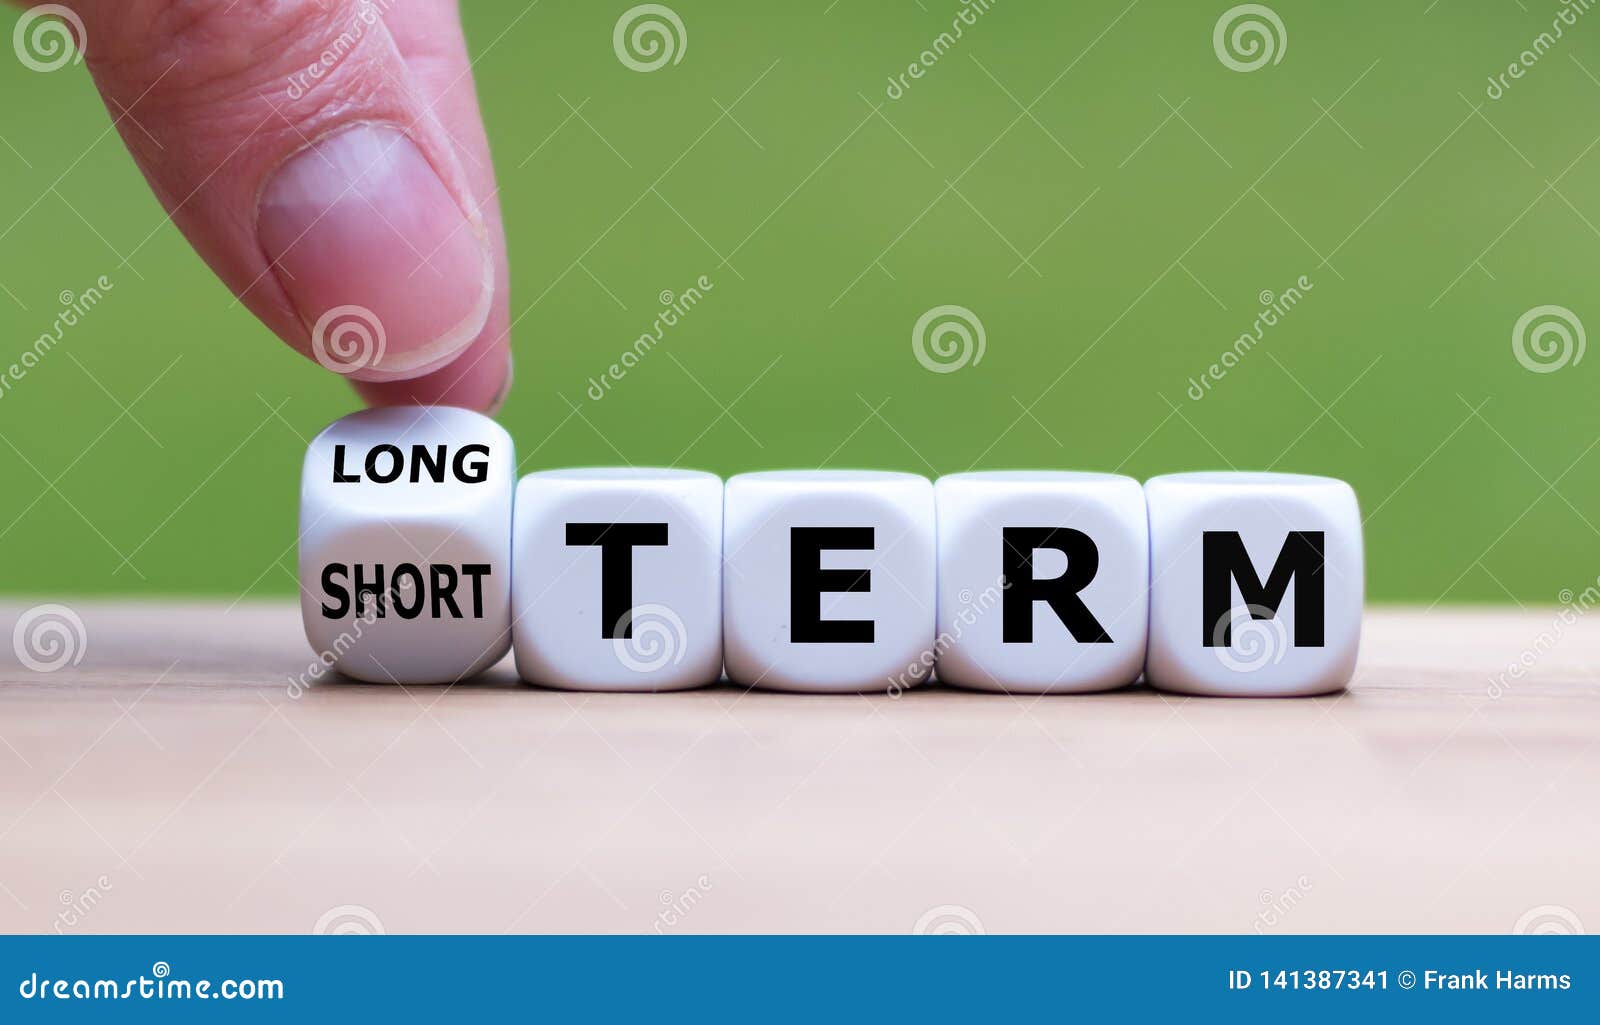 hand turns a dice and changes the expression `short term ` to `long term ` or vice versa.